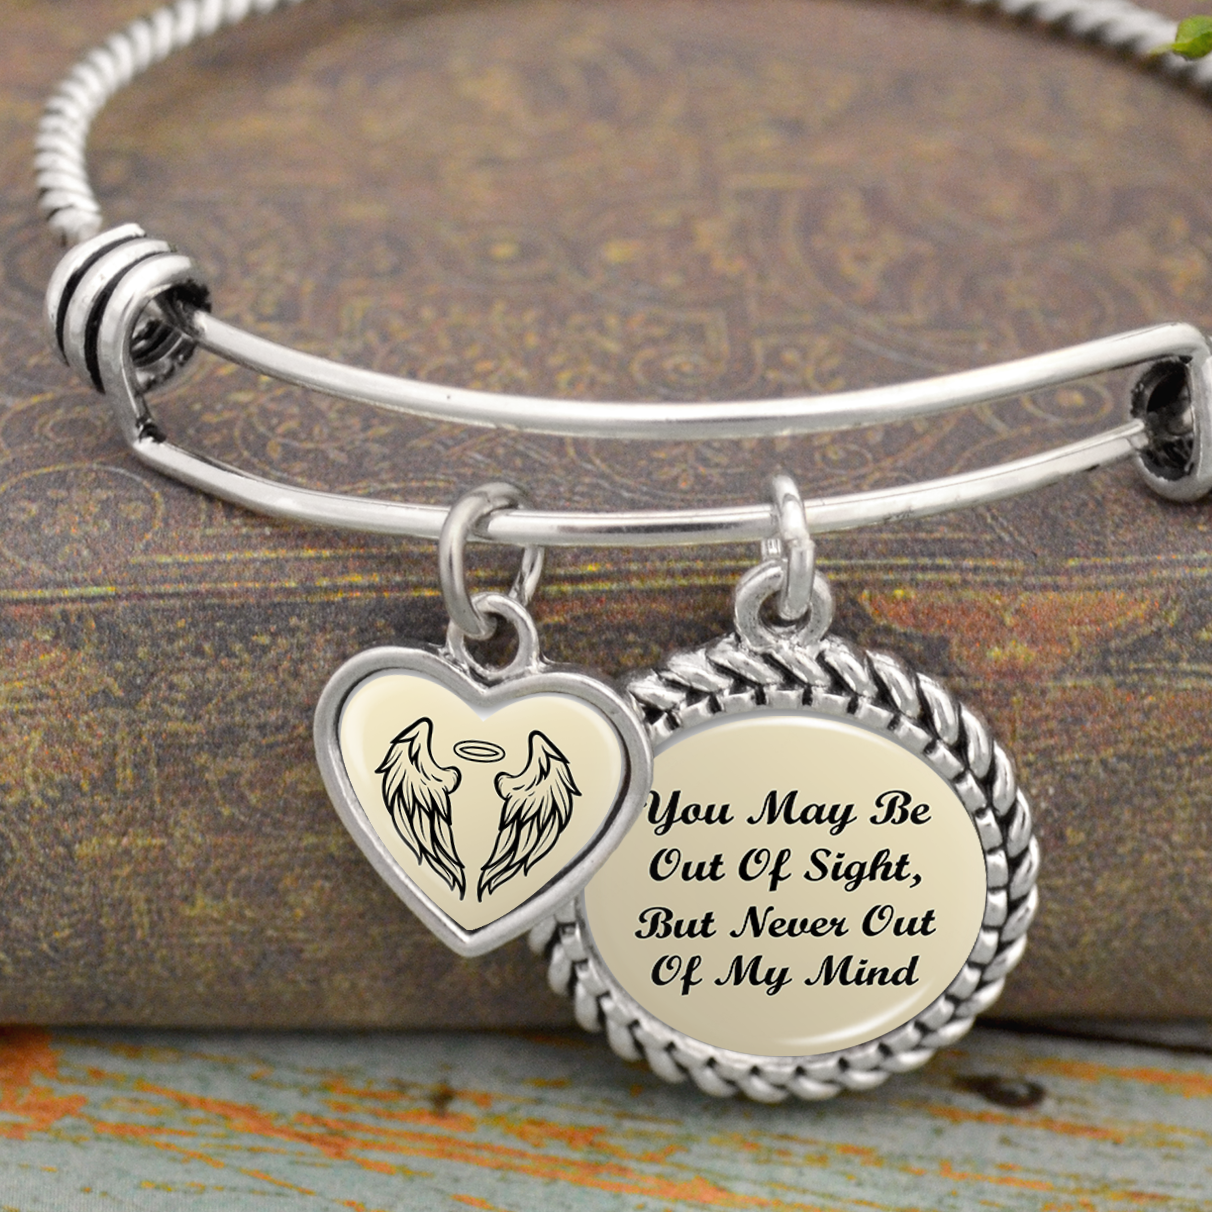 You May Be Out Of Sight, But Never Out Of My Mind Charm Bracelet